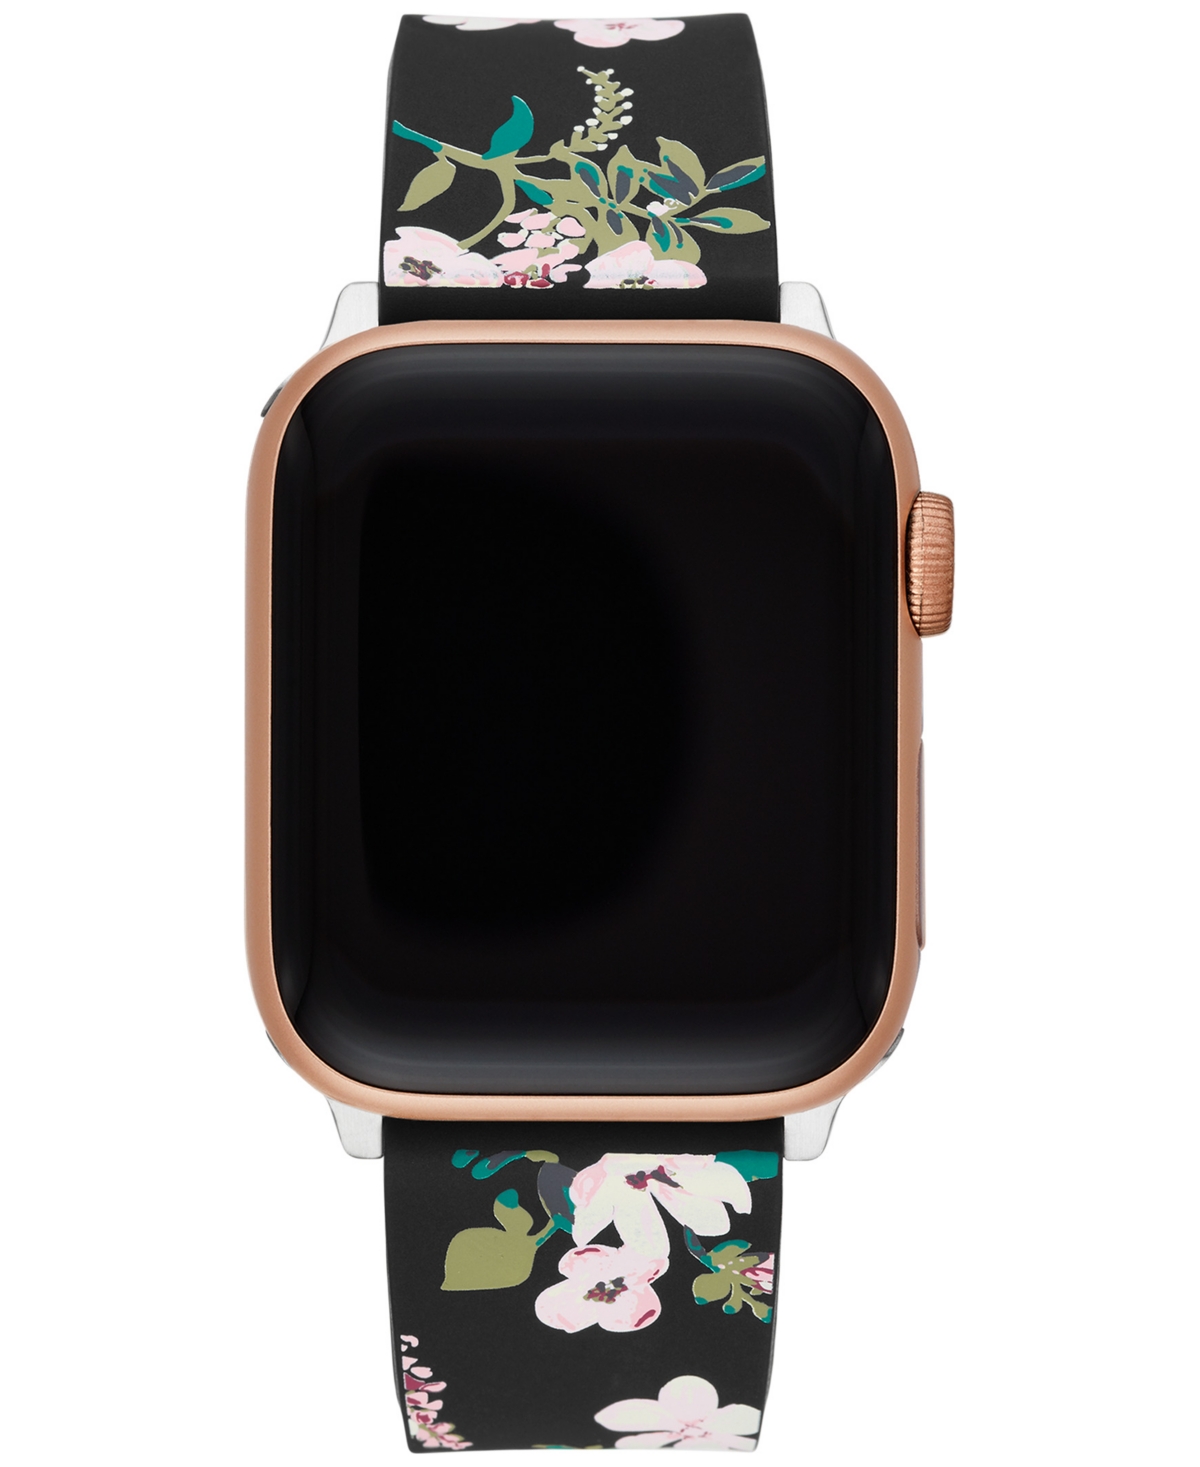 kate spade new york Women's Multicolored Floral Silicone Apple Watch® Strap  & Reviews - All Fashion Jewelry - Jewelry & Watches - Macy's